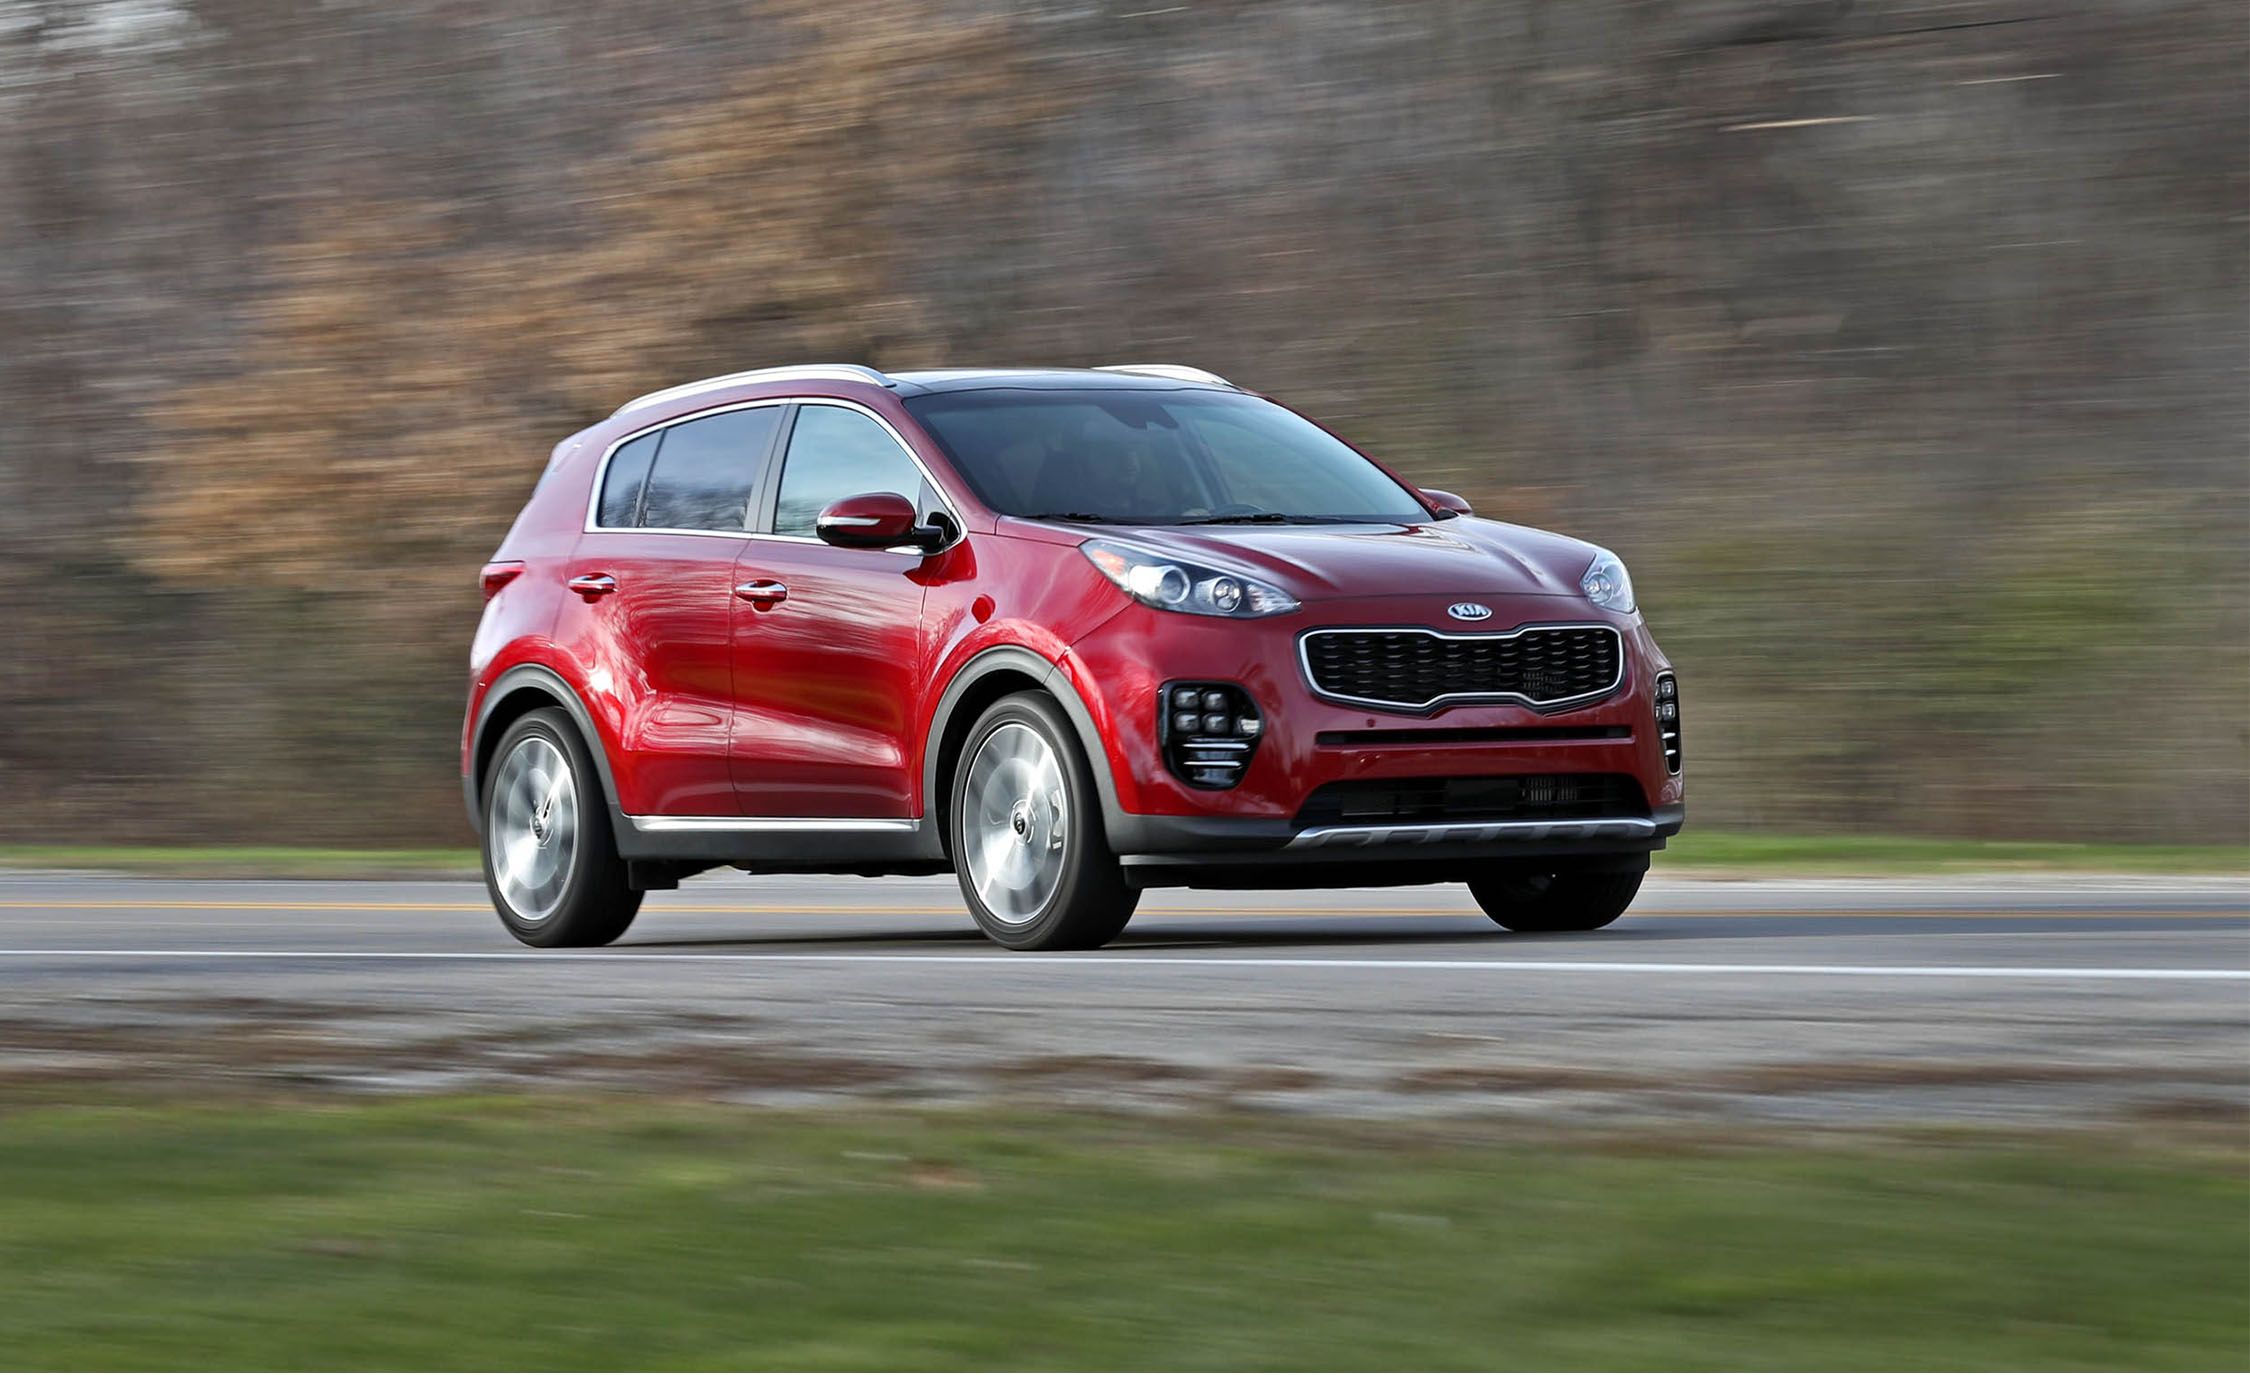 2018 Kia Sportage Review, Pricing, and Specs